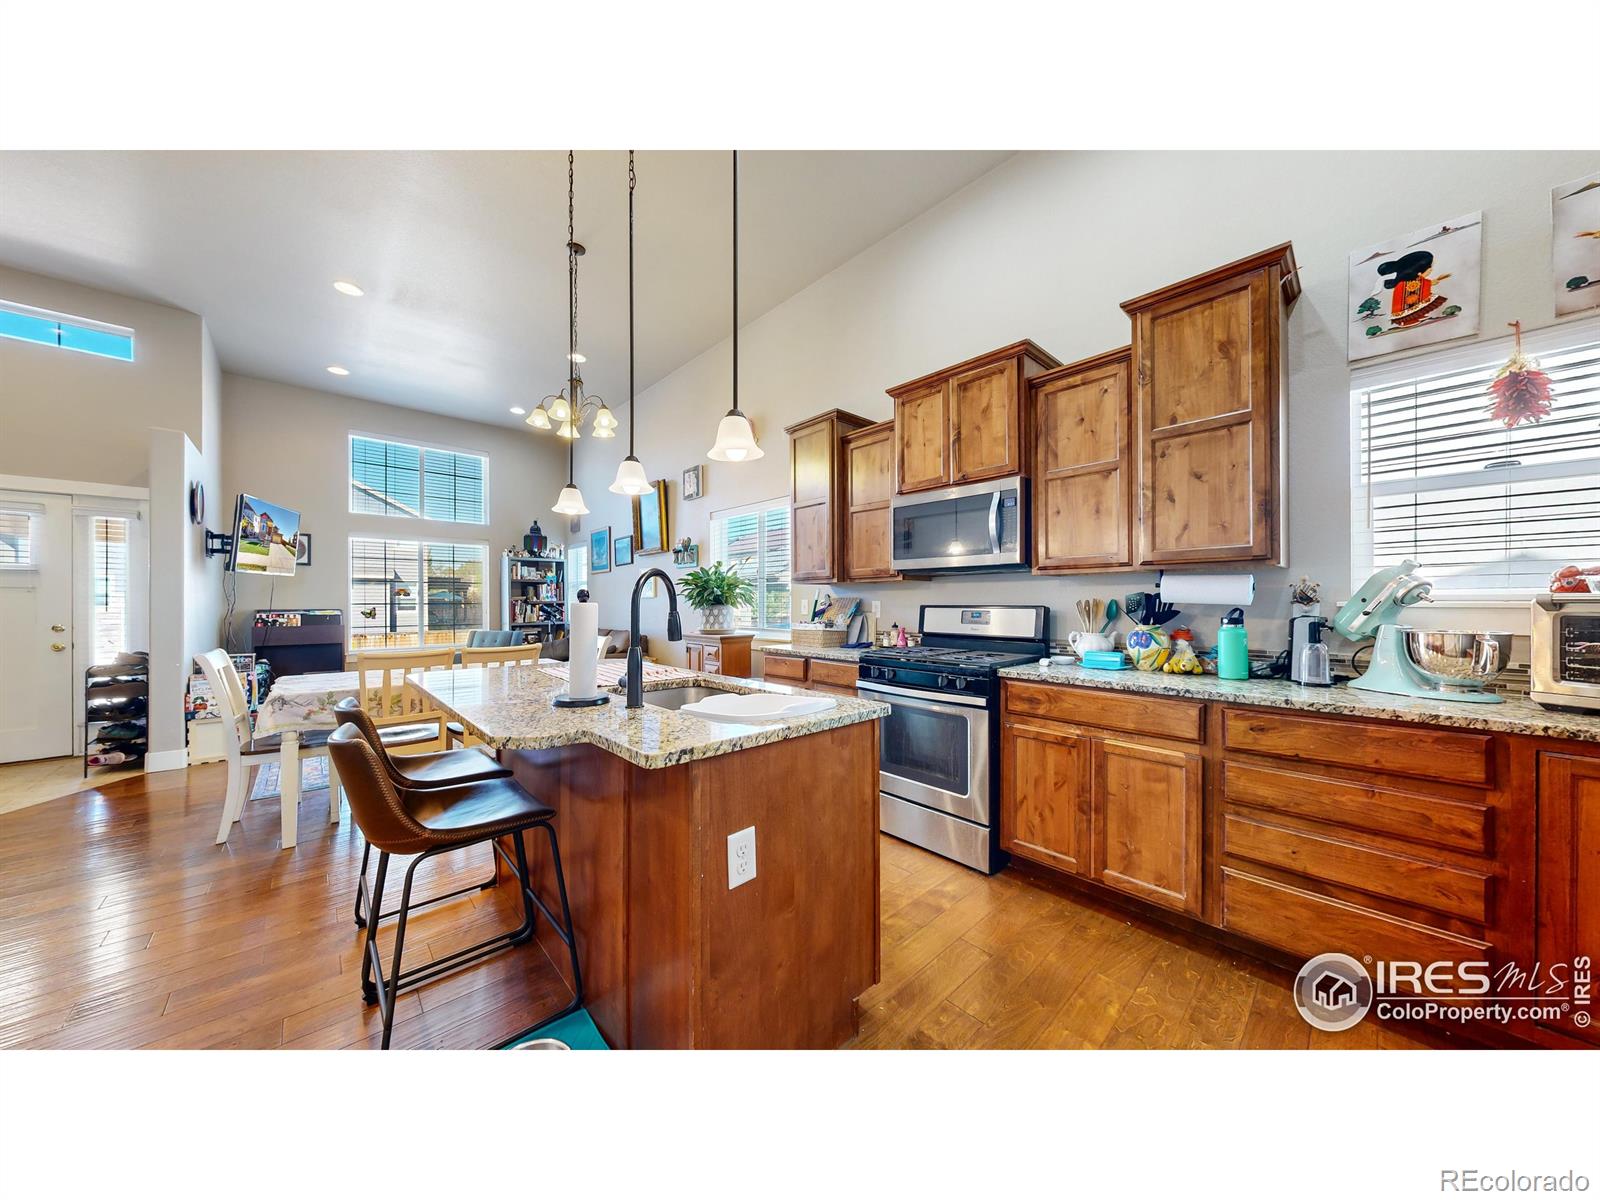 Report Image for 1802  Deep Woods Lane,Fort Collins, Colorado